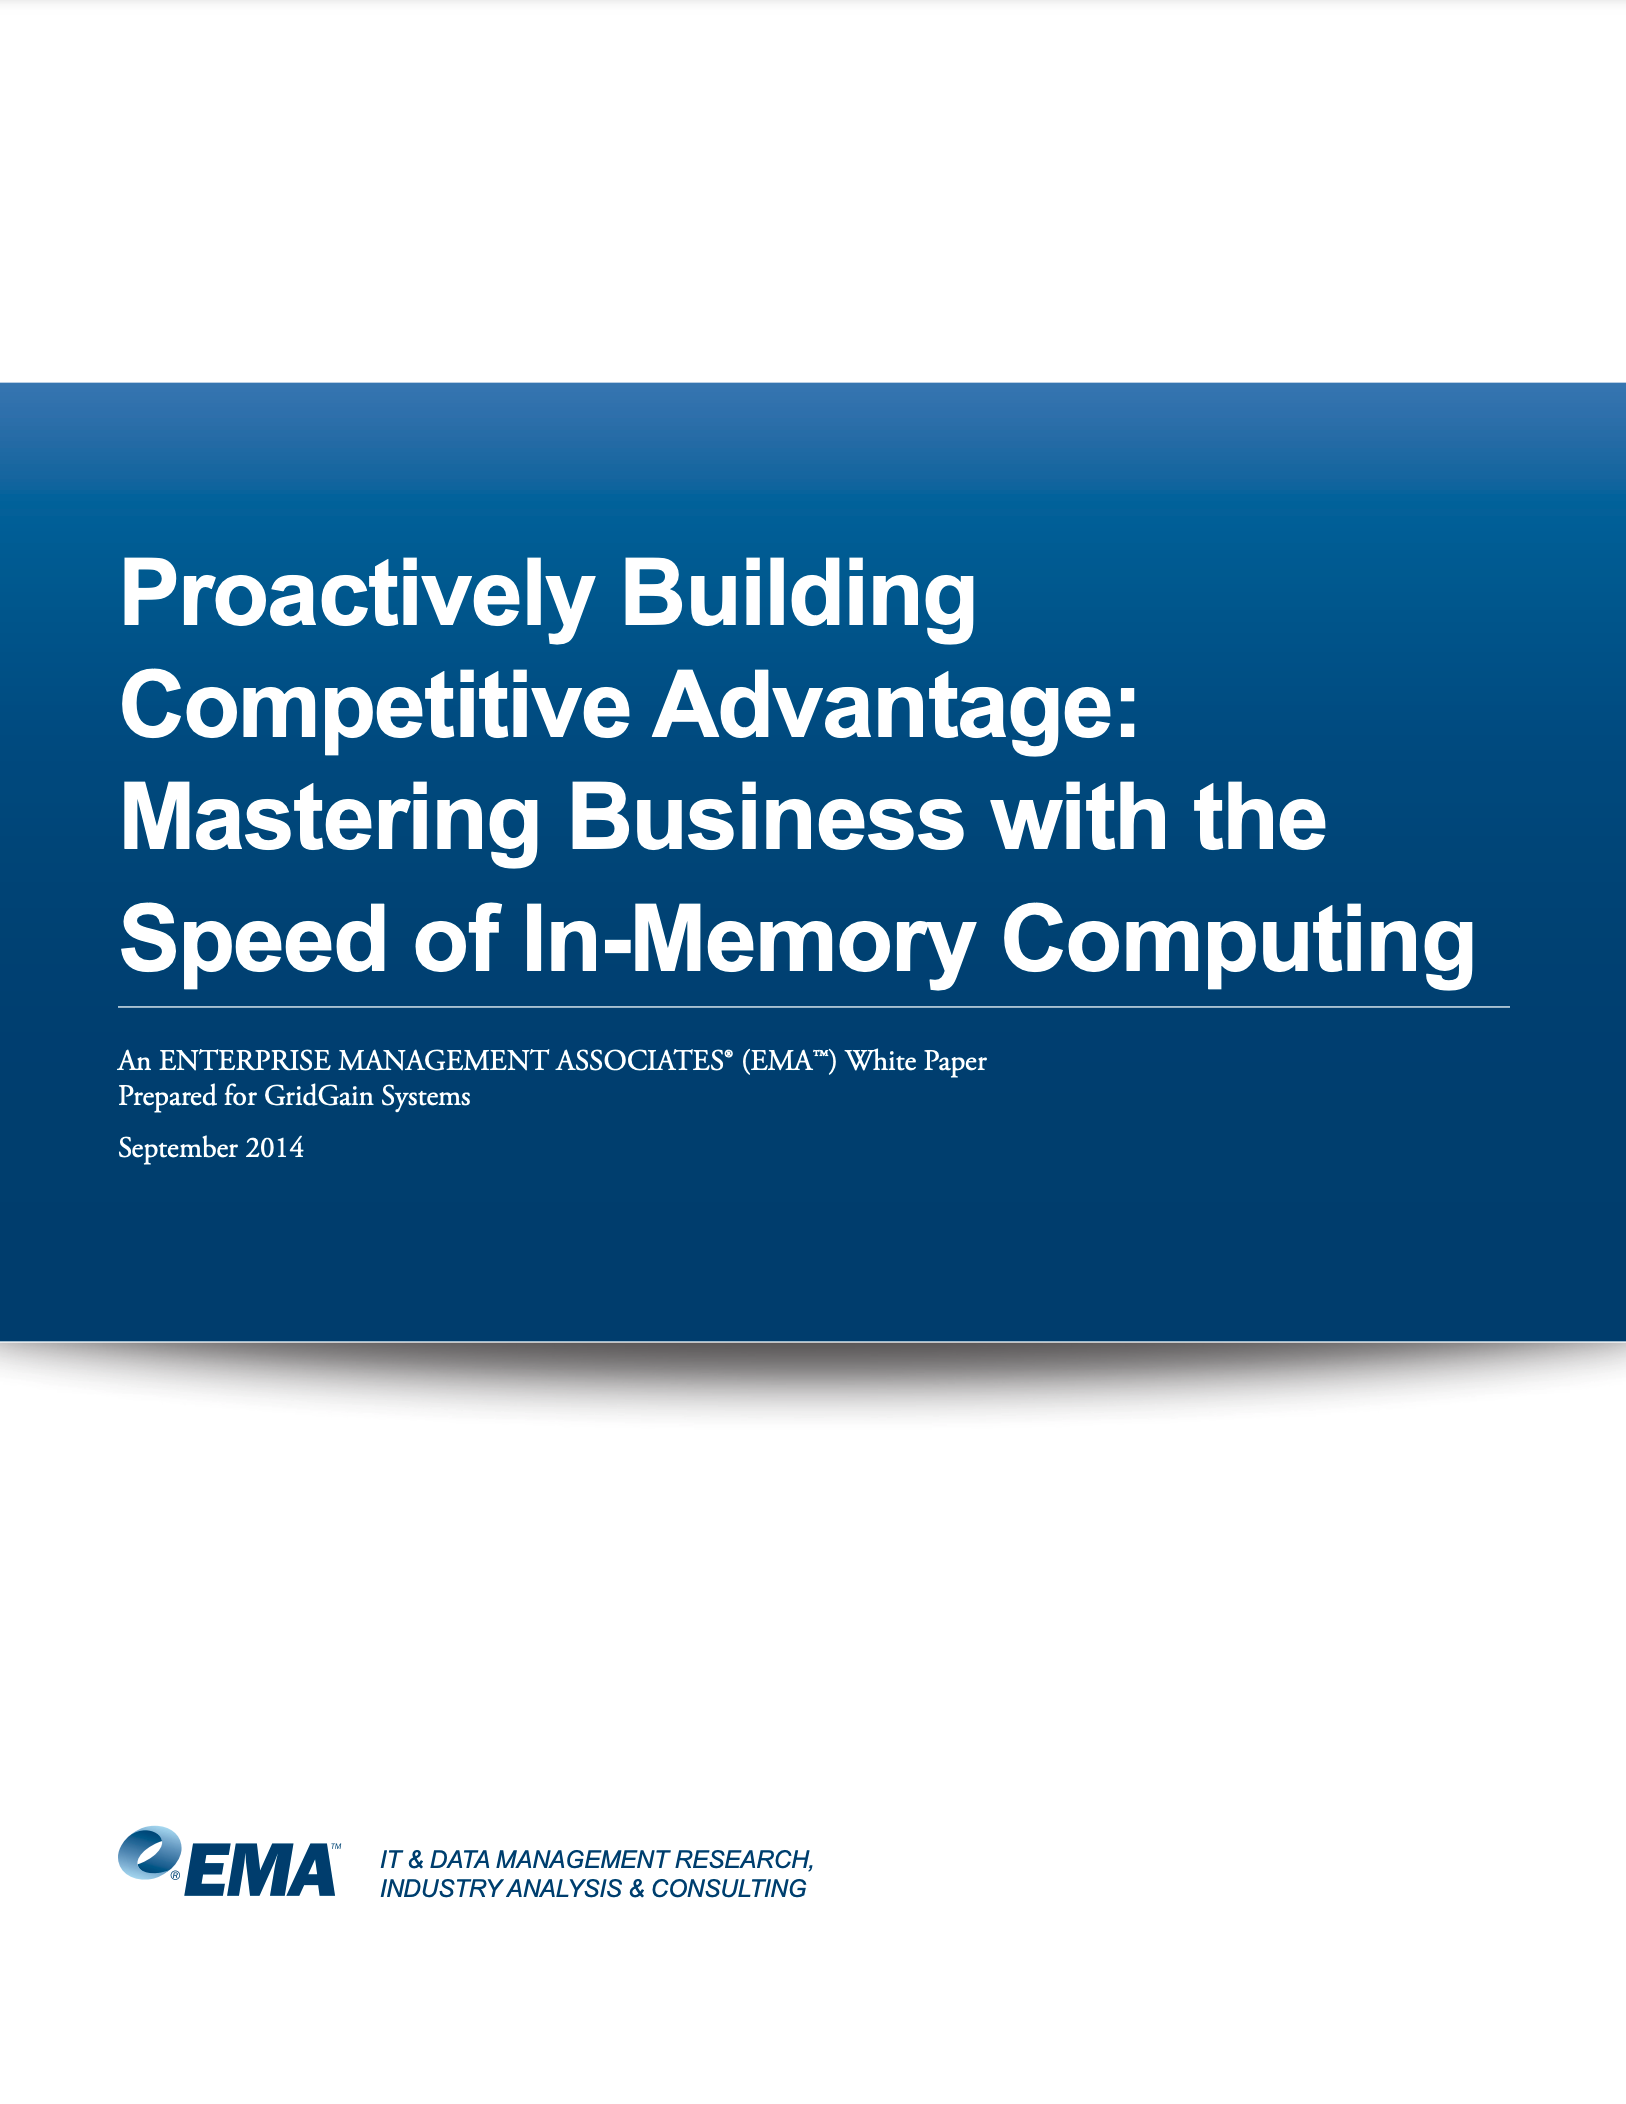 Proactively Building Competitive Advantage: Mastering Business with the Speed of In-Memory Computing